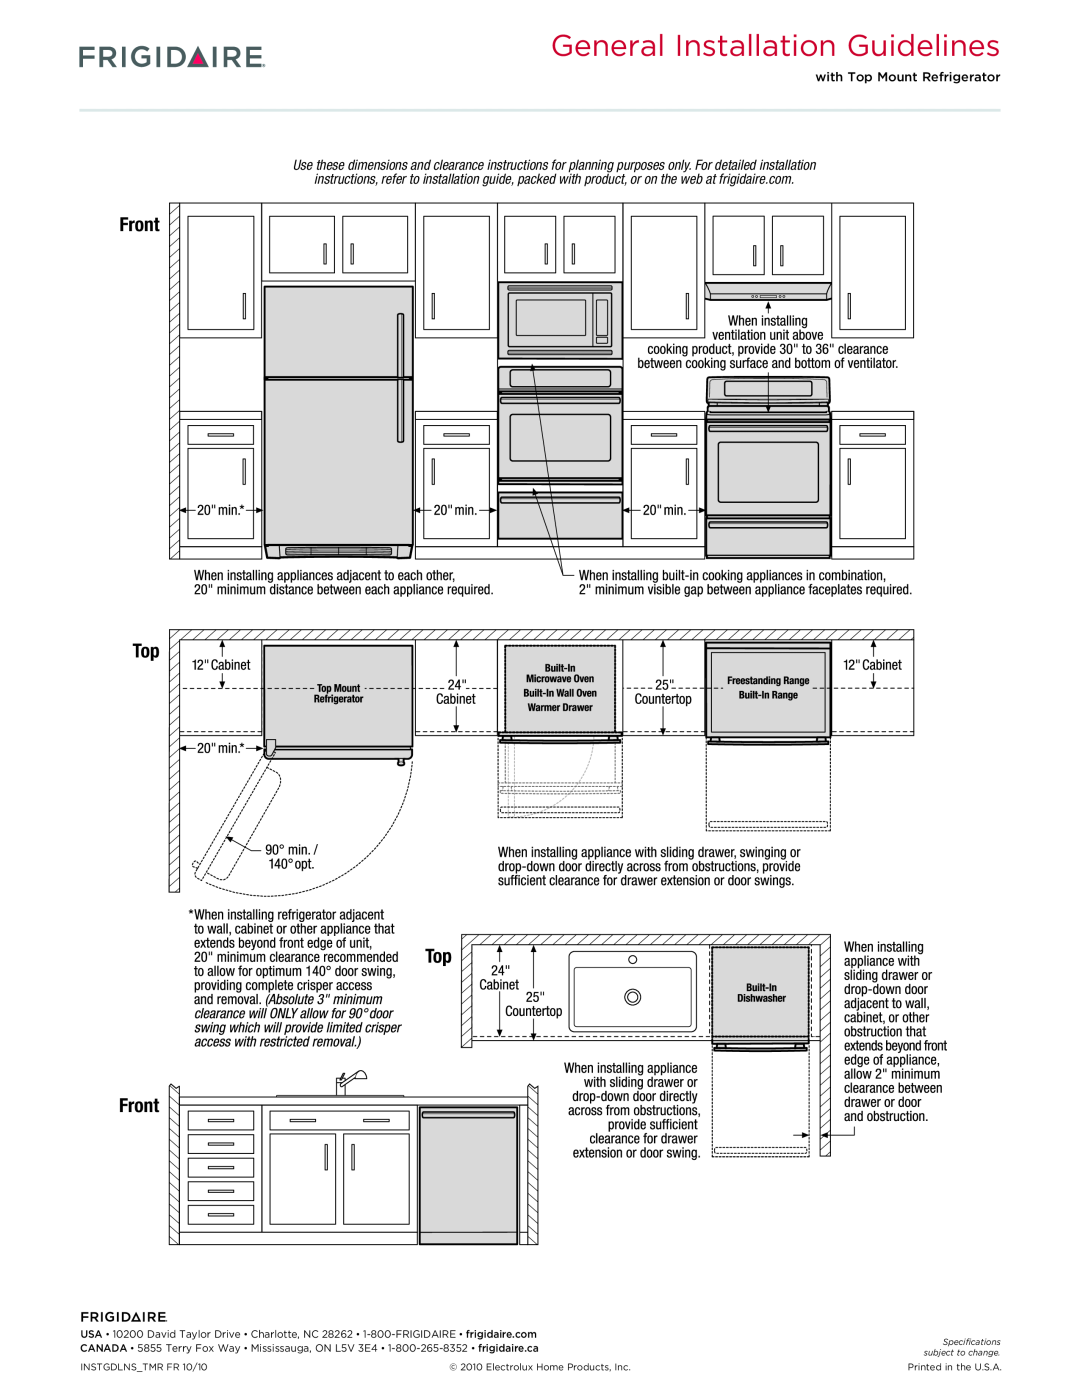 Frigidaire FPES3085KF General Installation Guidelines, Top Front, with Top Mount Refrigerator, INSTGDLNS TMR FR 10/10 